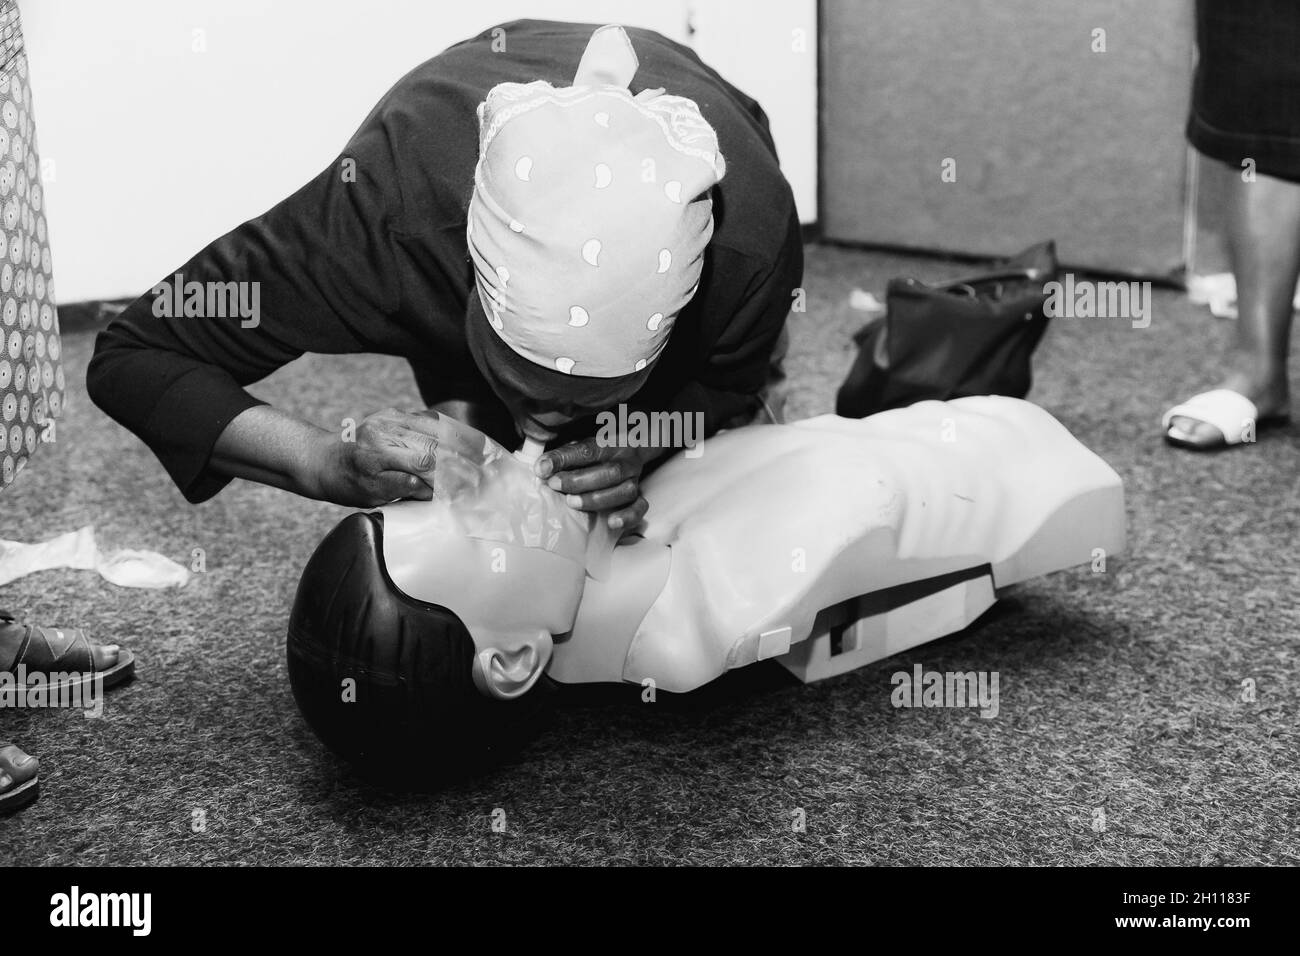 JOHANNESBURG, SOUTH AFRICA - Aug 12, 2021: A First Aid CPR training with plastic dummy Stock Photo